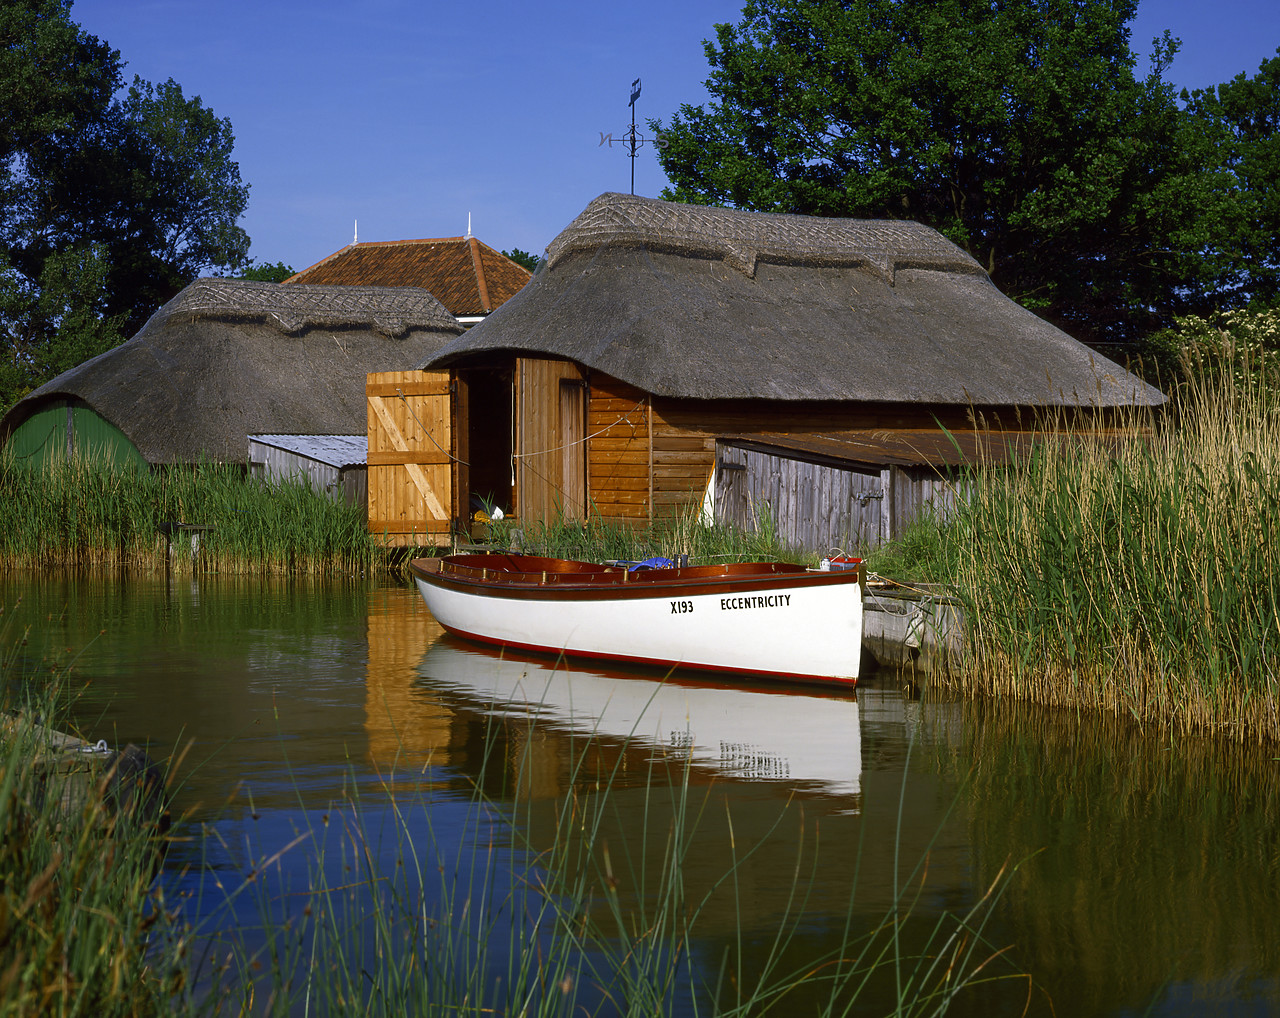 #86717-1 - Thatched Boat Houses, Hickling Broad, Norfolk, England